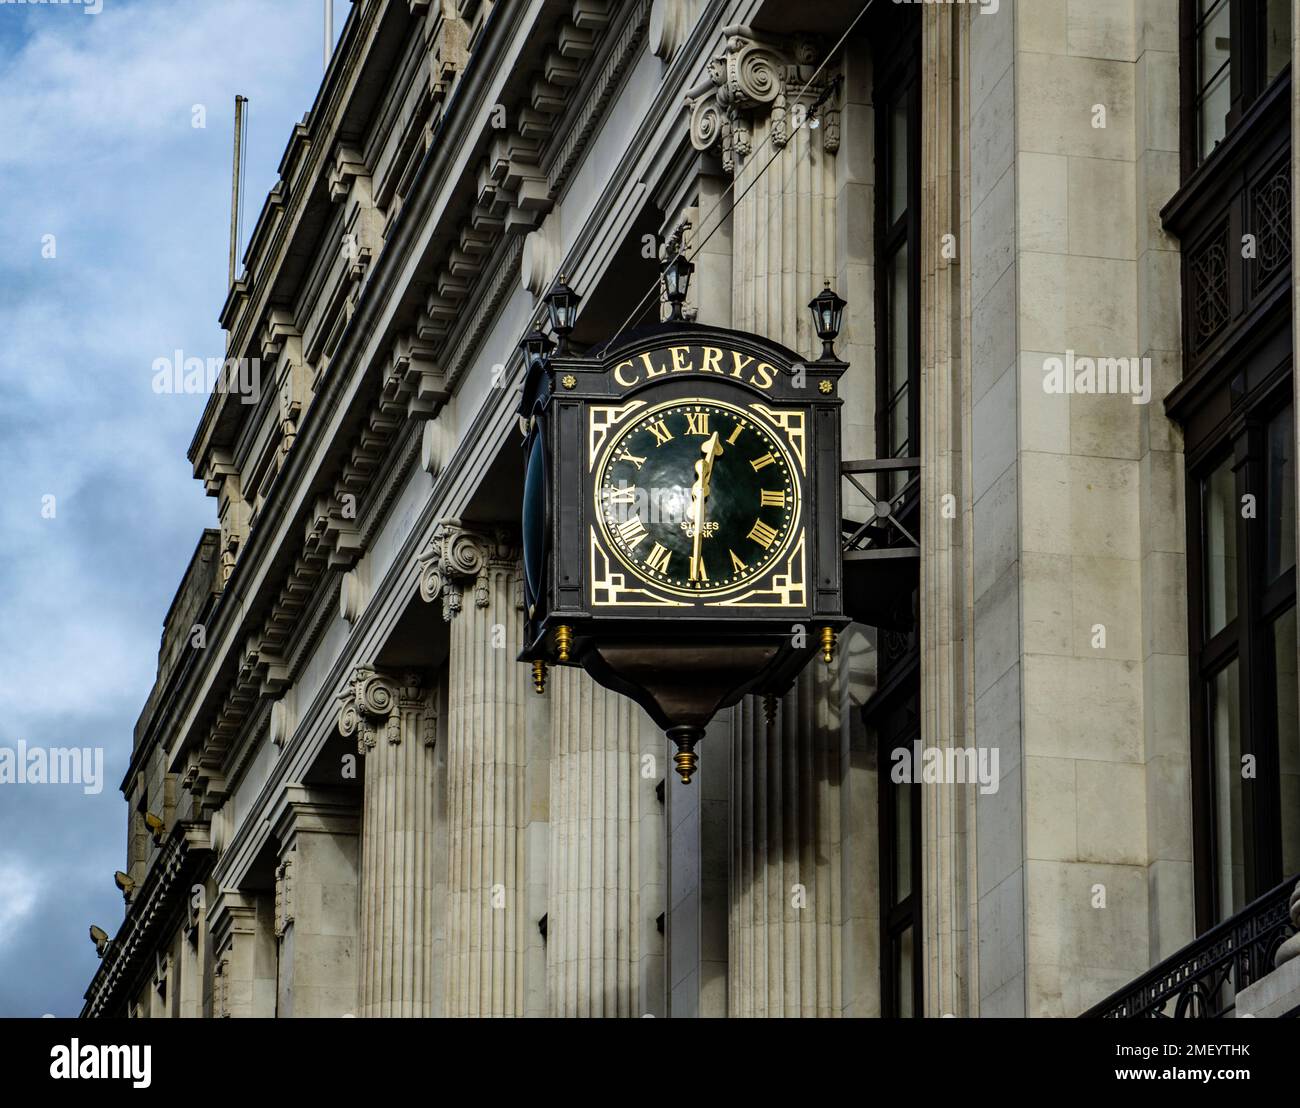 The famous Clery’s Clock unveiled in January 2022 following its refurbishment. On the Clerys Quarter in O’Connell St. Dublin, Ireland. Stock Photo